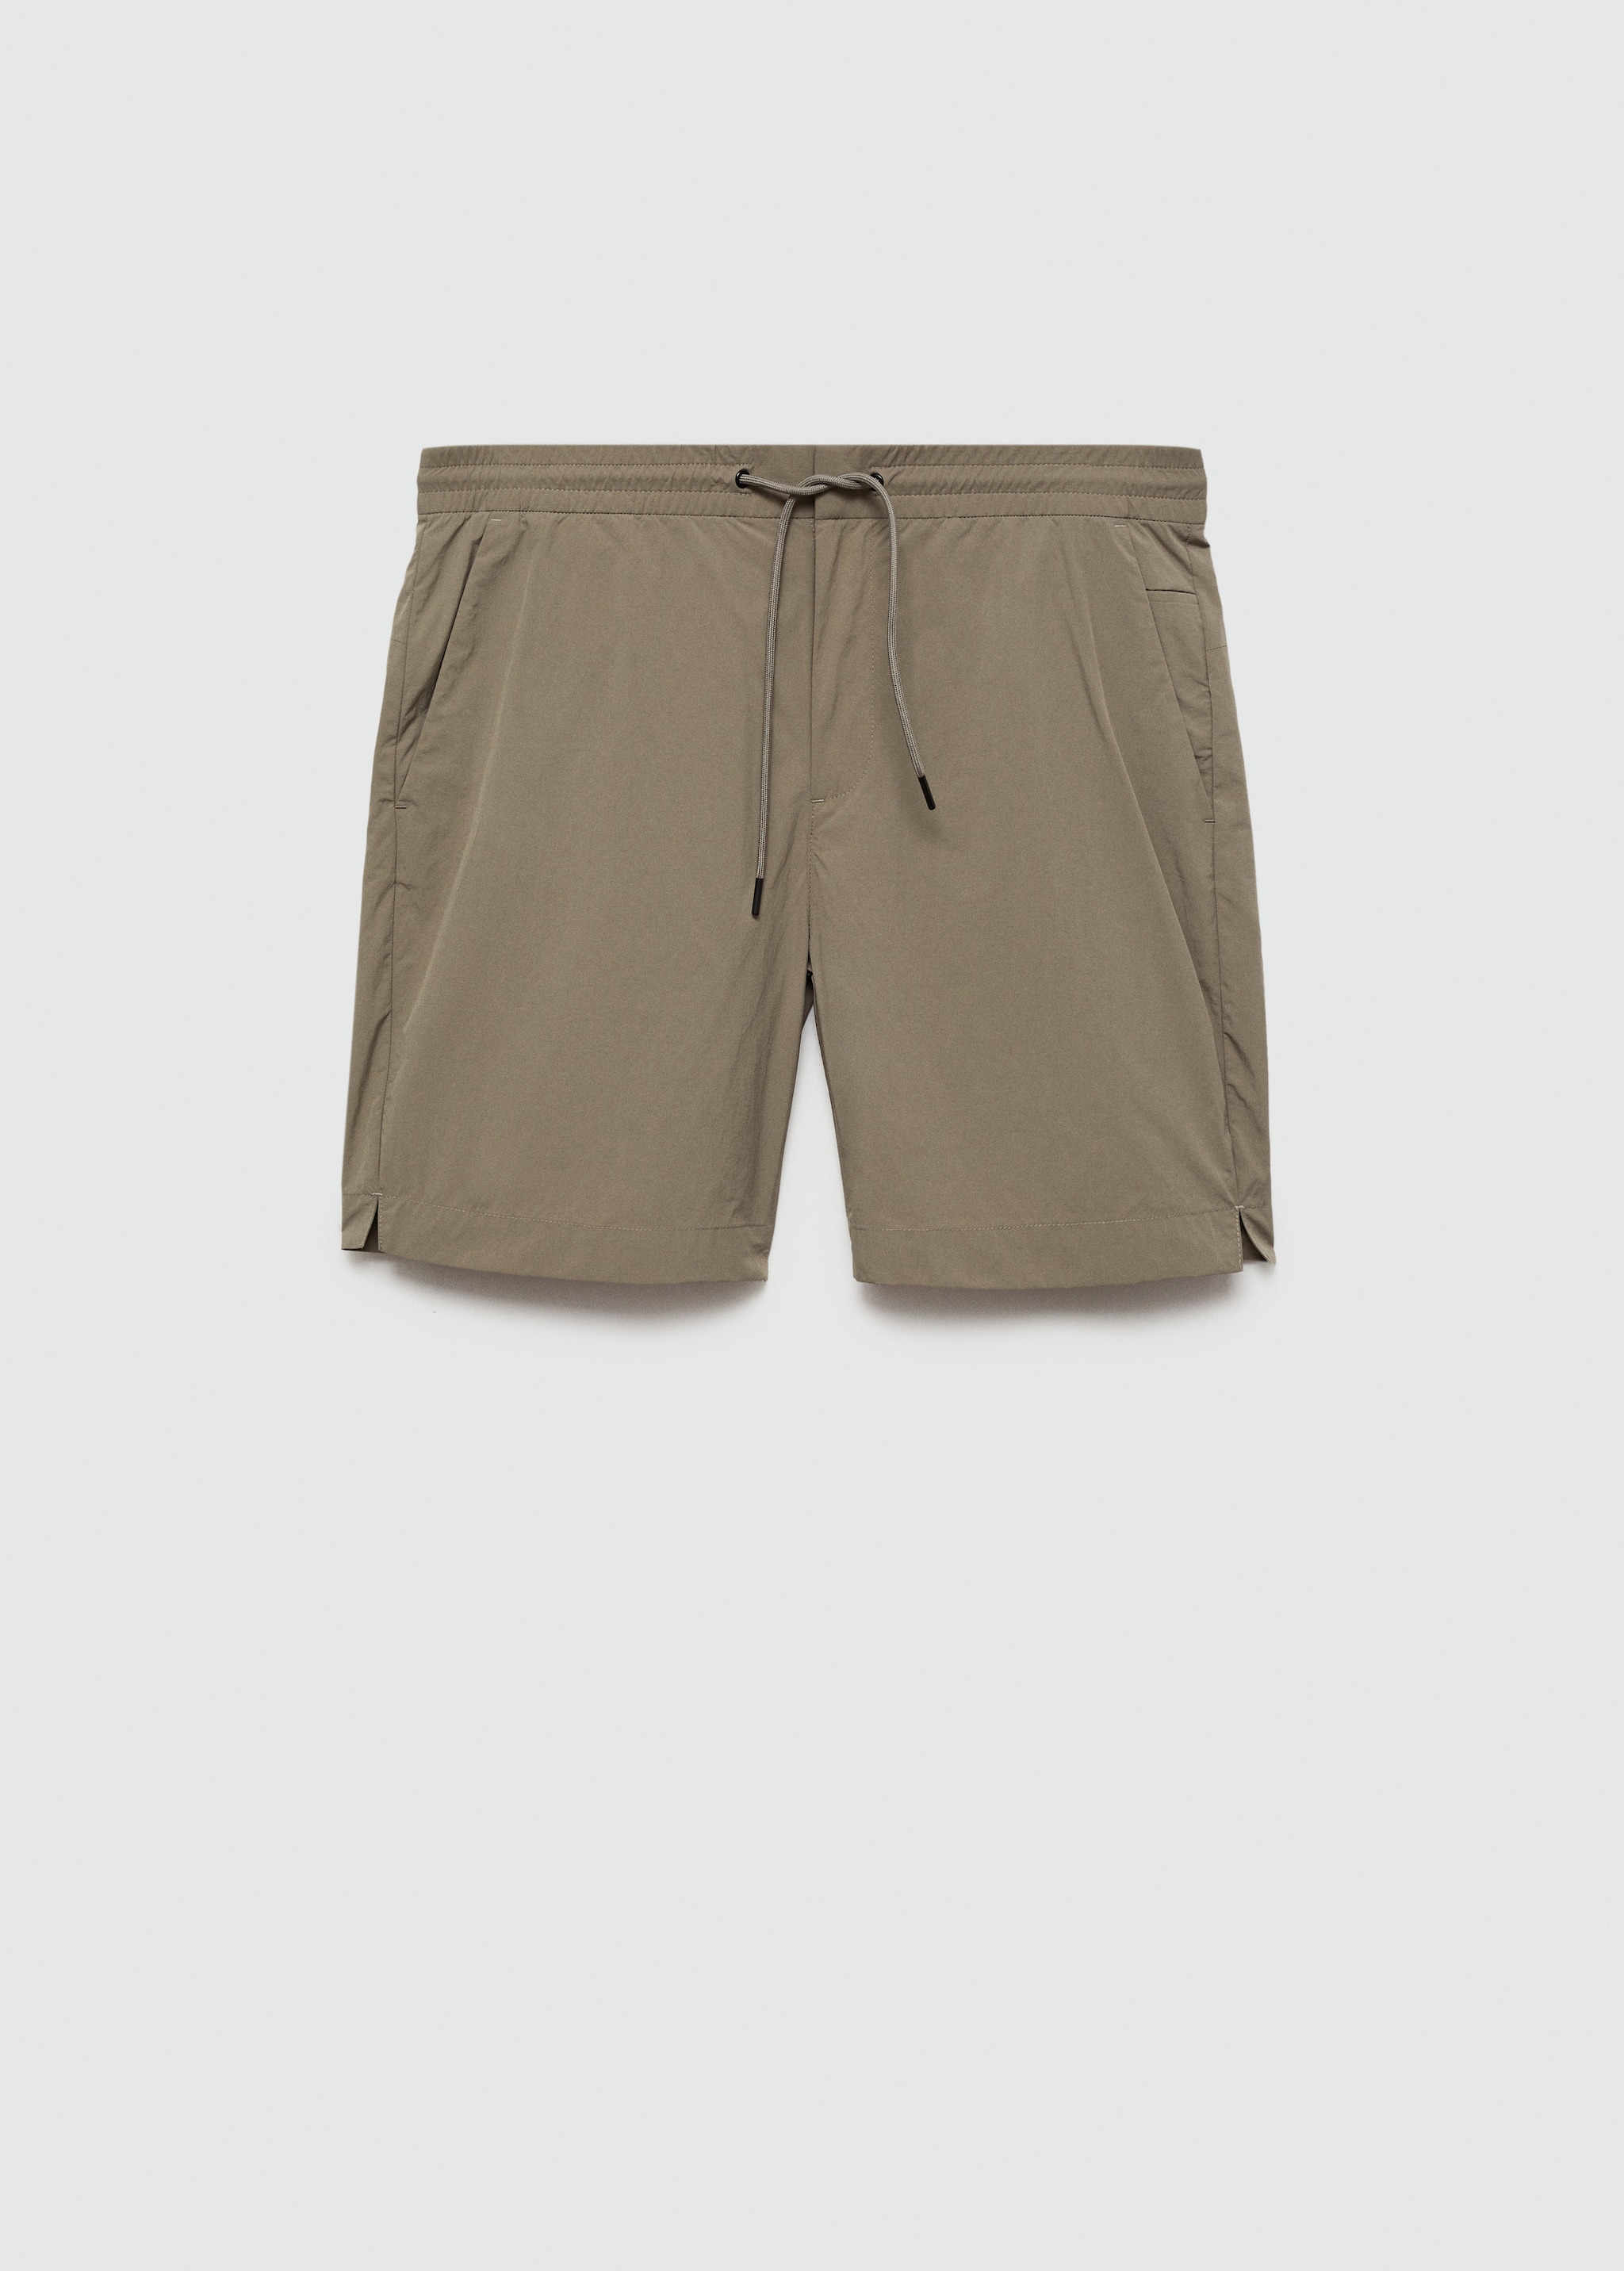 Water repellent drawstring Bermuda shorts - Article without model